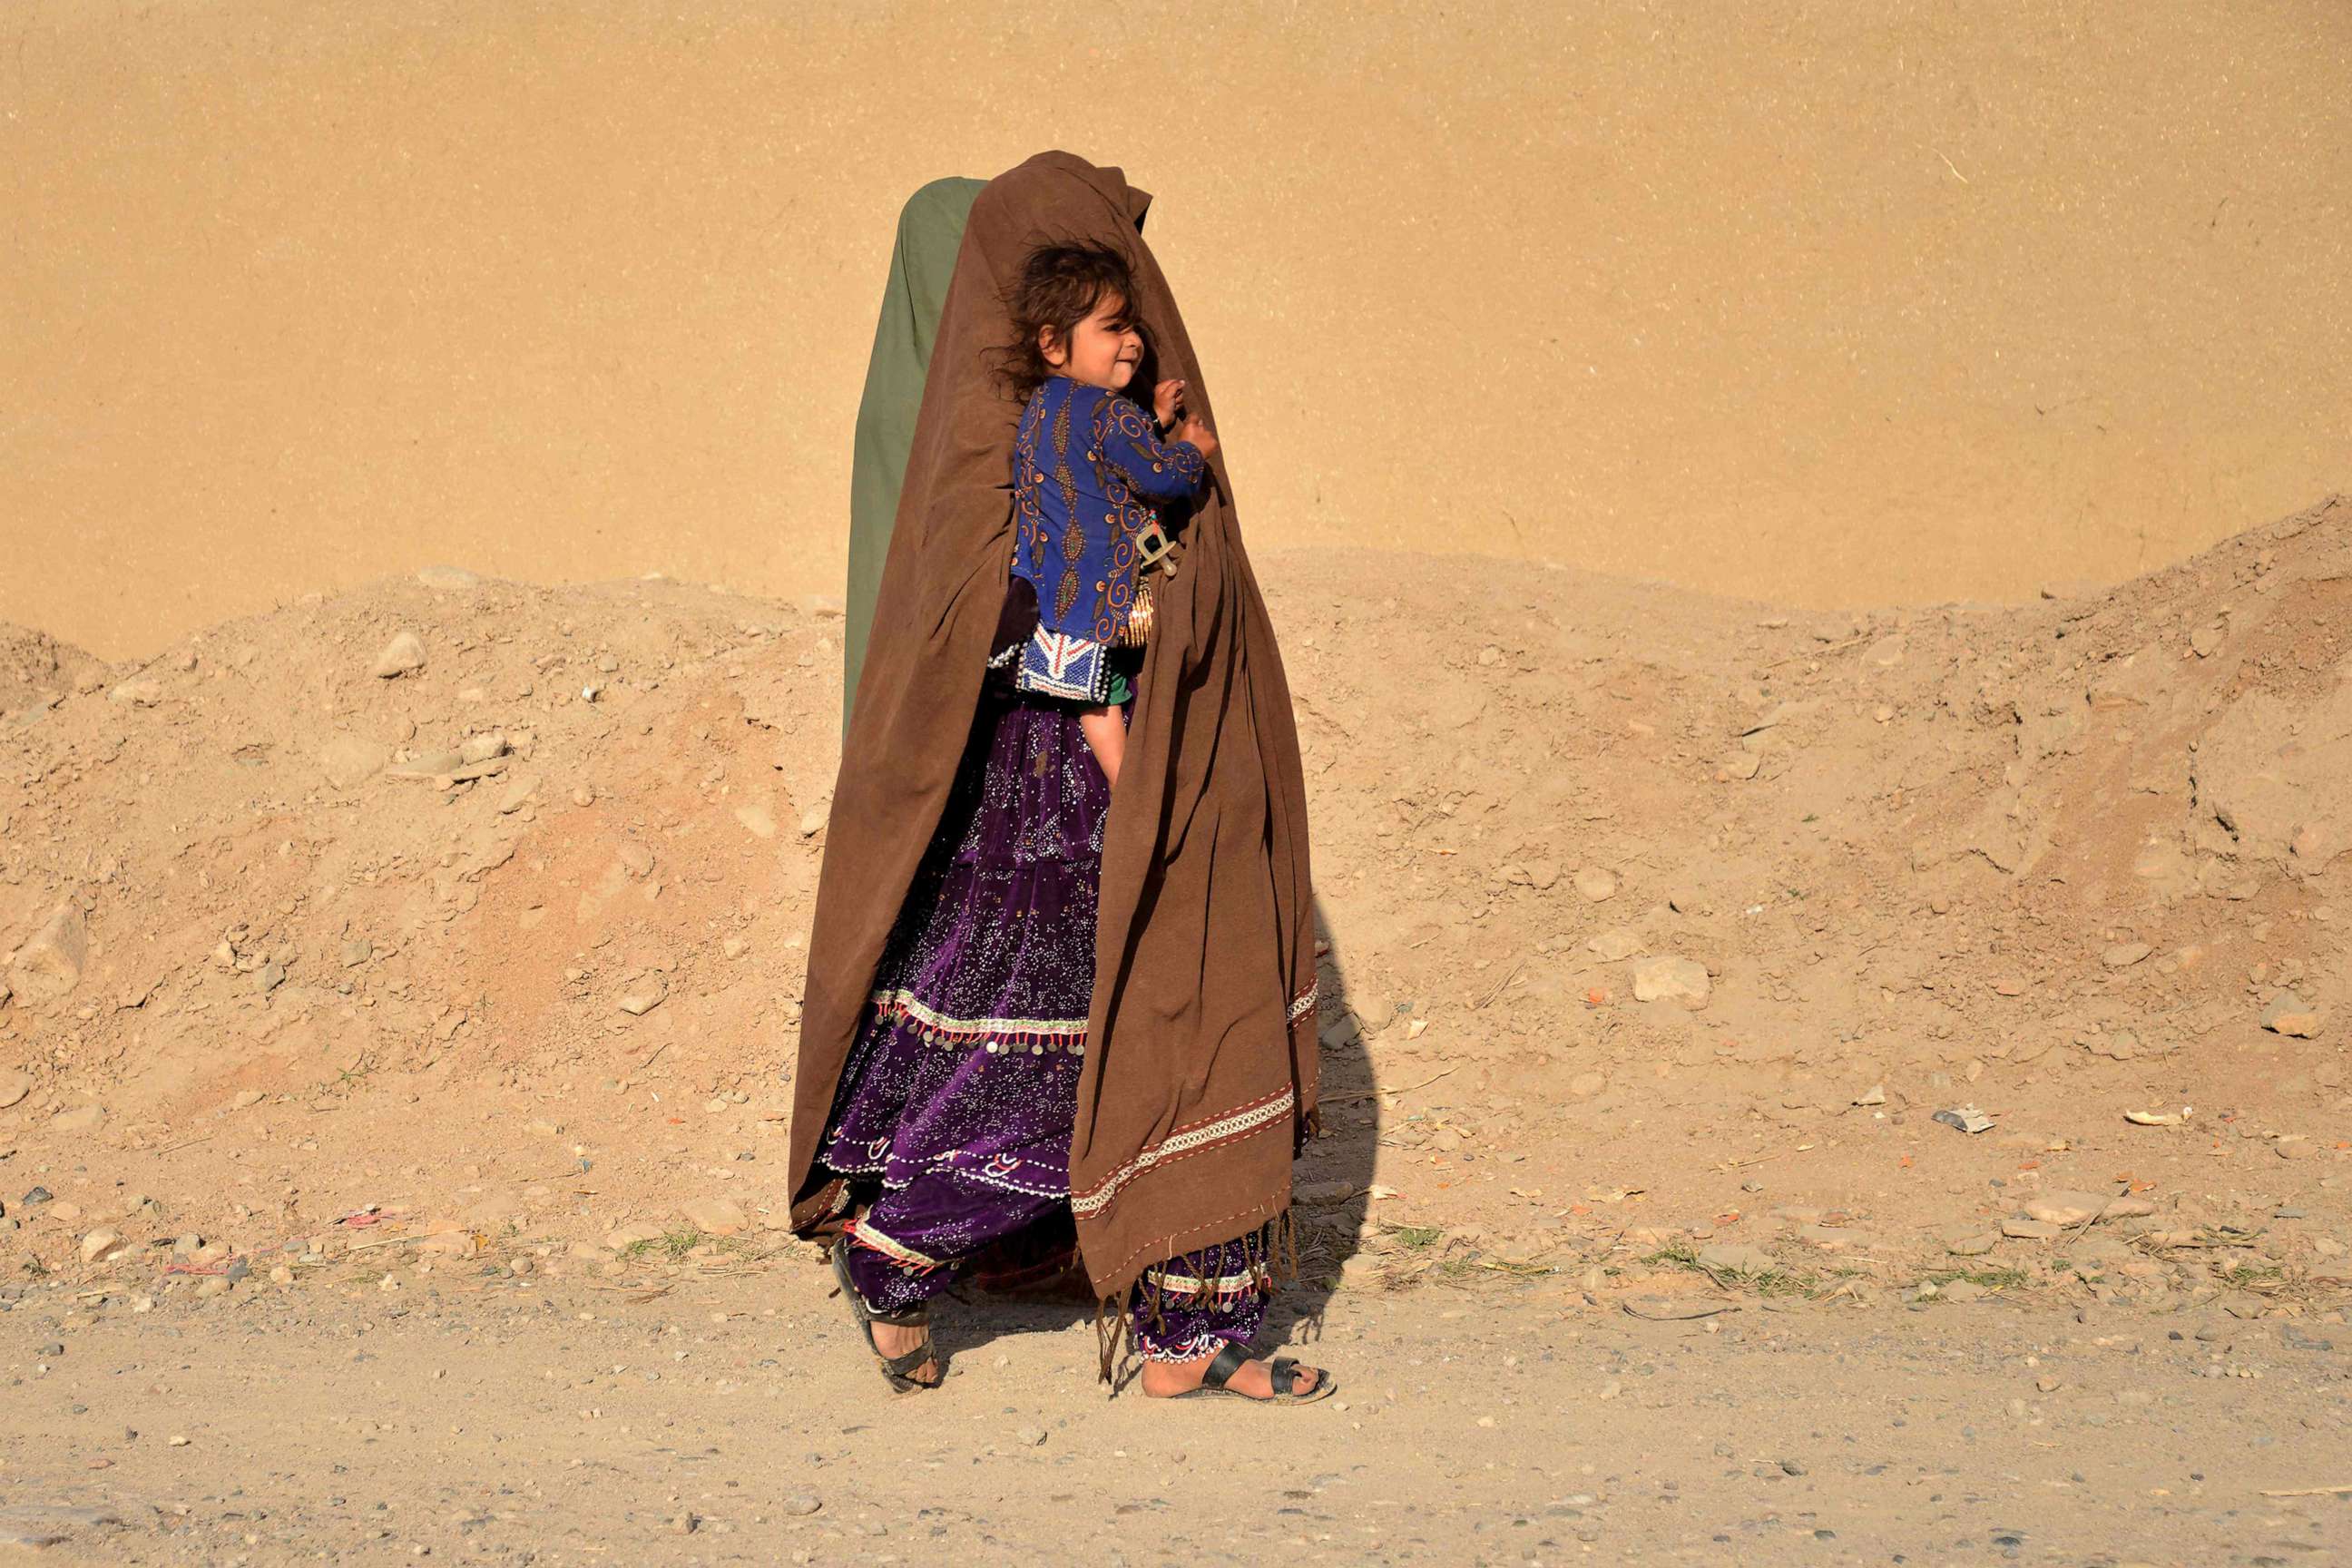 PHOTO: TA woman carrying a child walks along a roadside in the Zhari district of Kandahar province, Afghanistan, on Feb. 15, 2023.